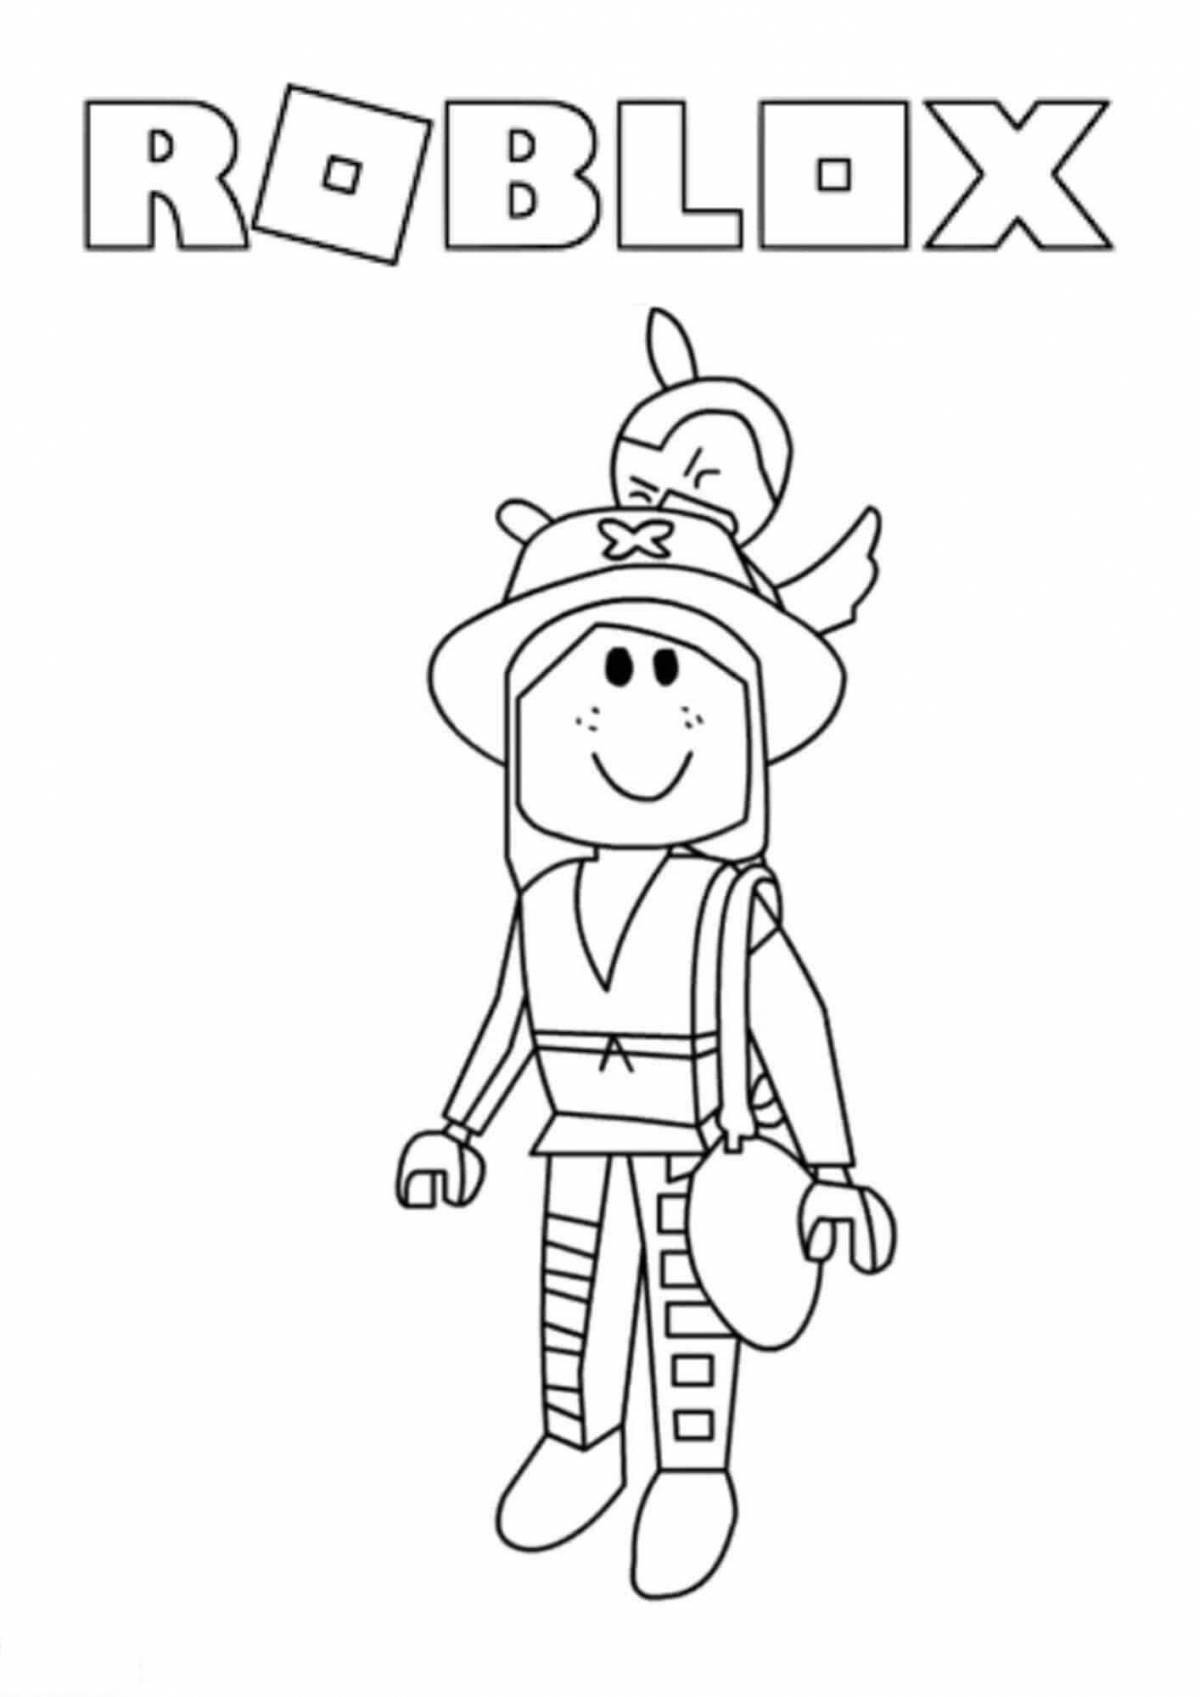 Cute roblox kp coloring page